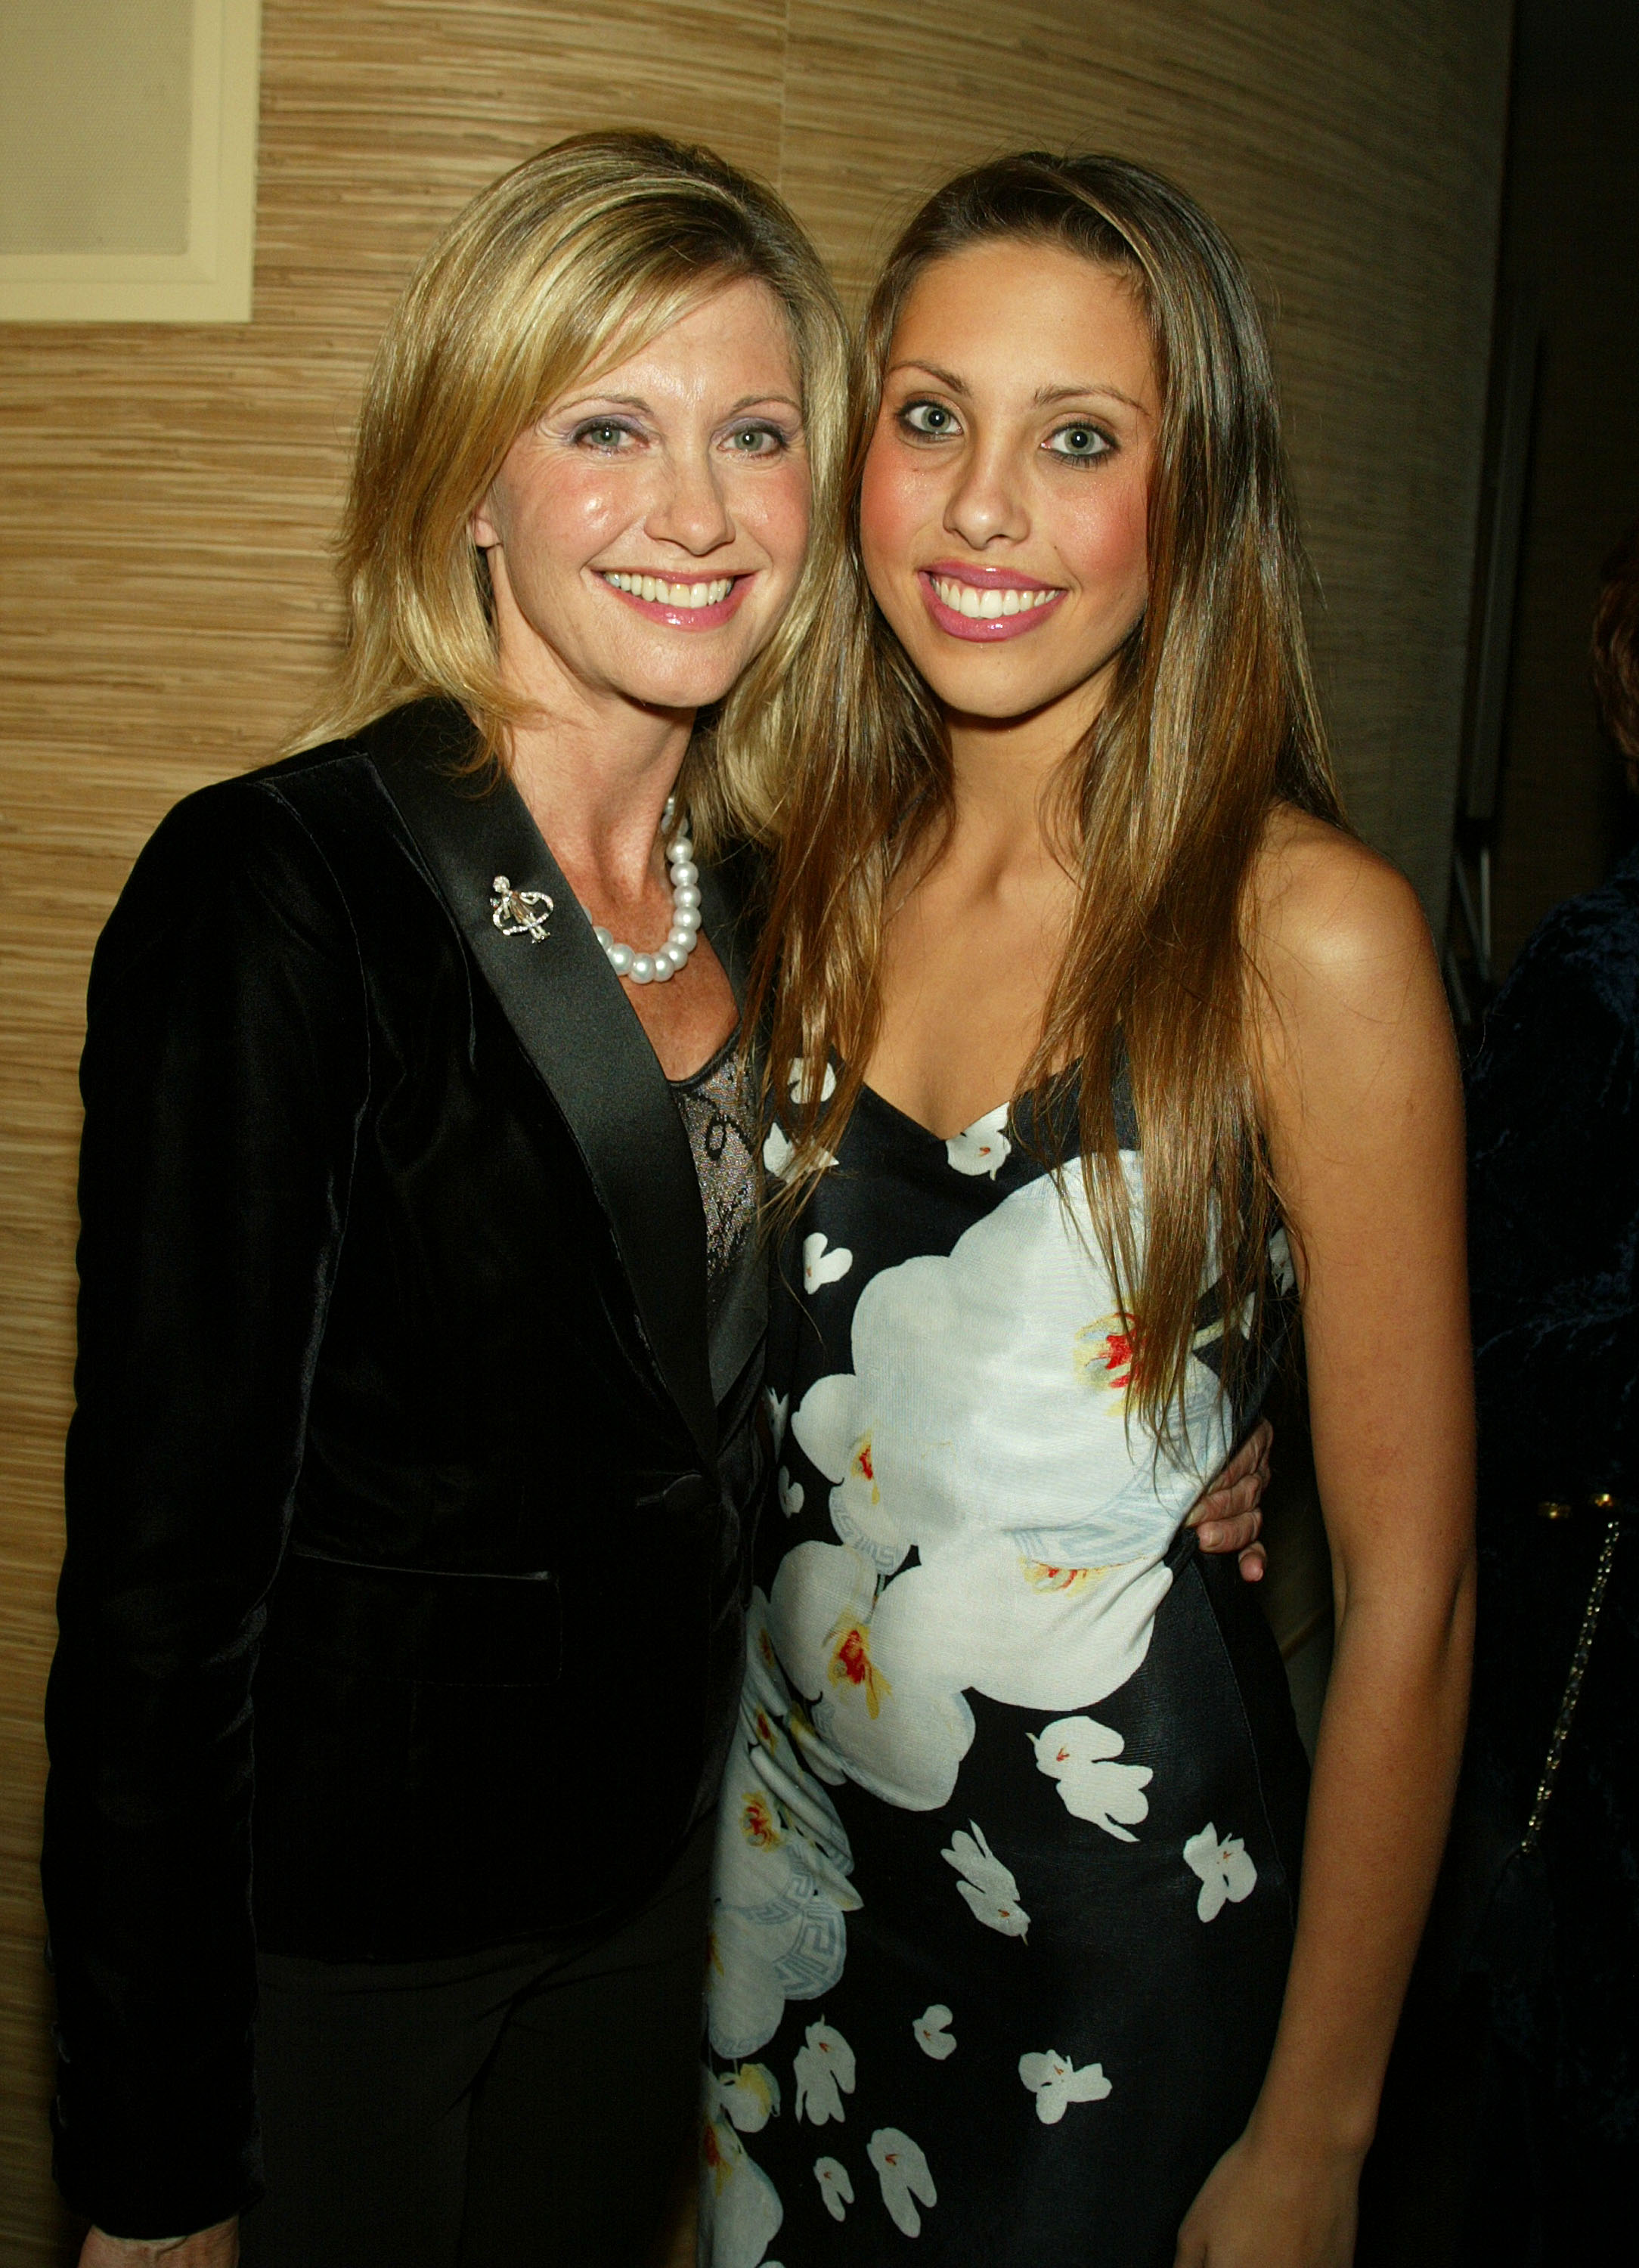 Olivia Newton-John and her daughter Chloe at "One World, One Child Benefit Concert in California in 2002 | Source: Getty Images